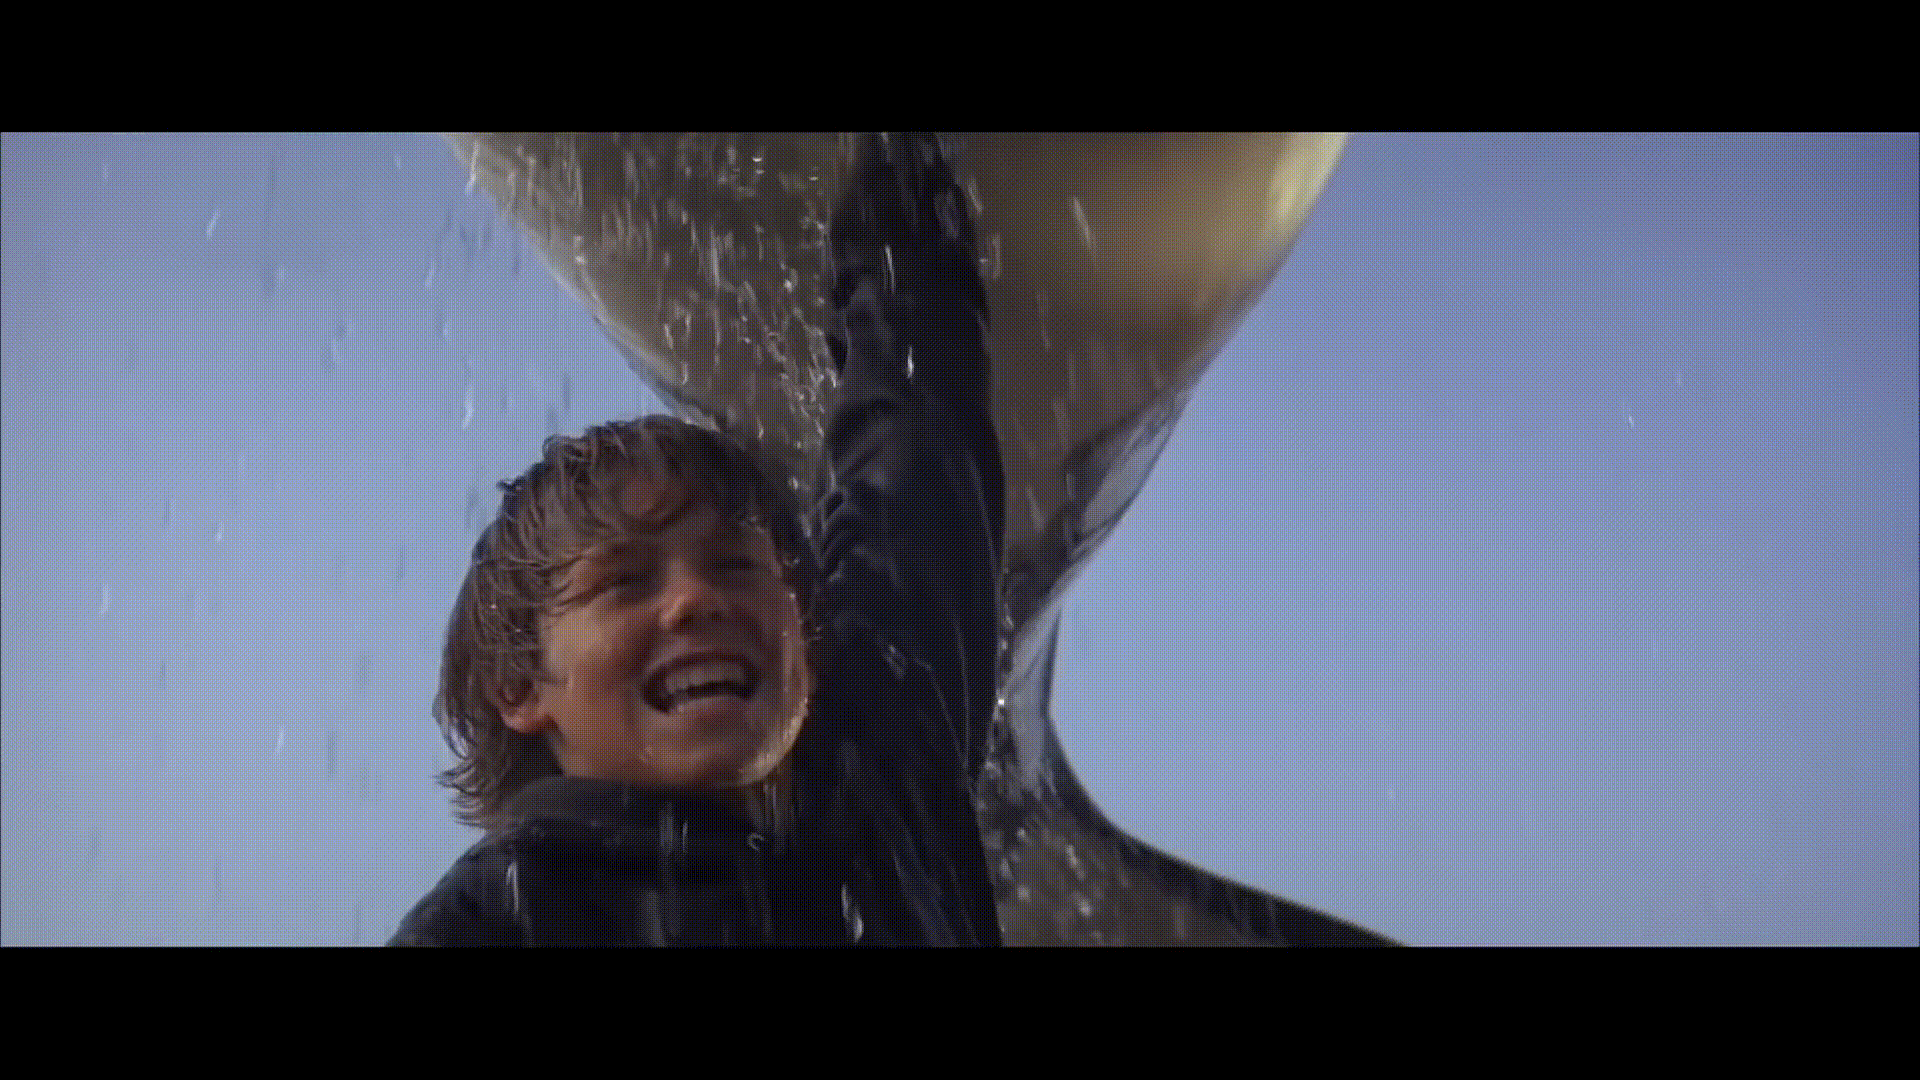 A gif from the movie Free Willy showing the whale jumping to freedom